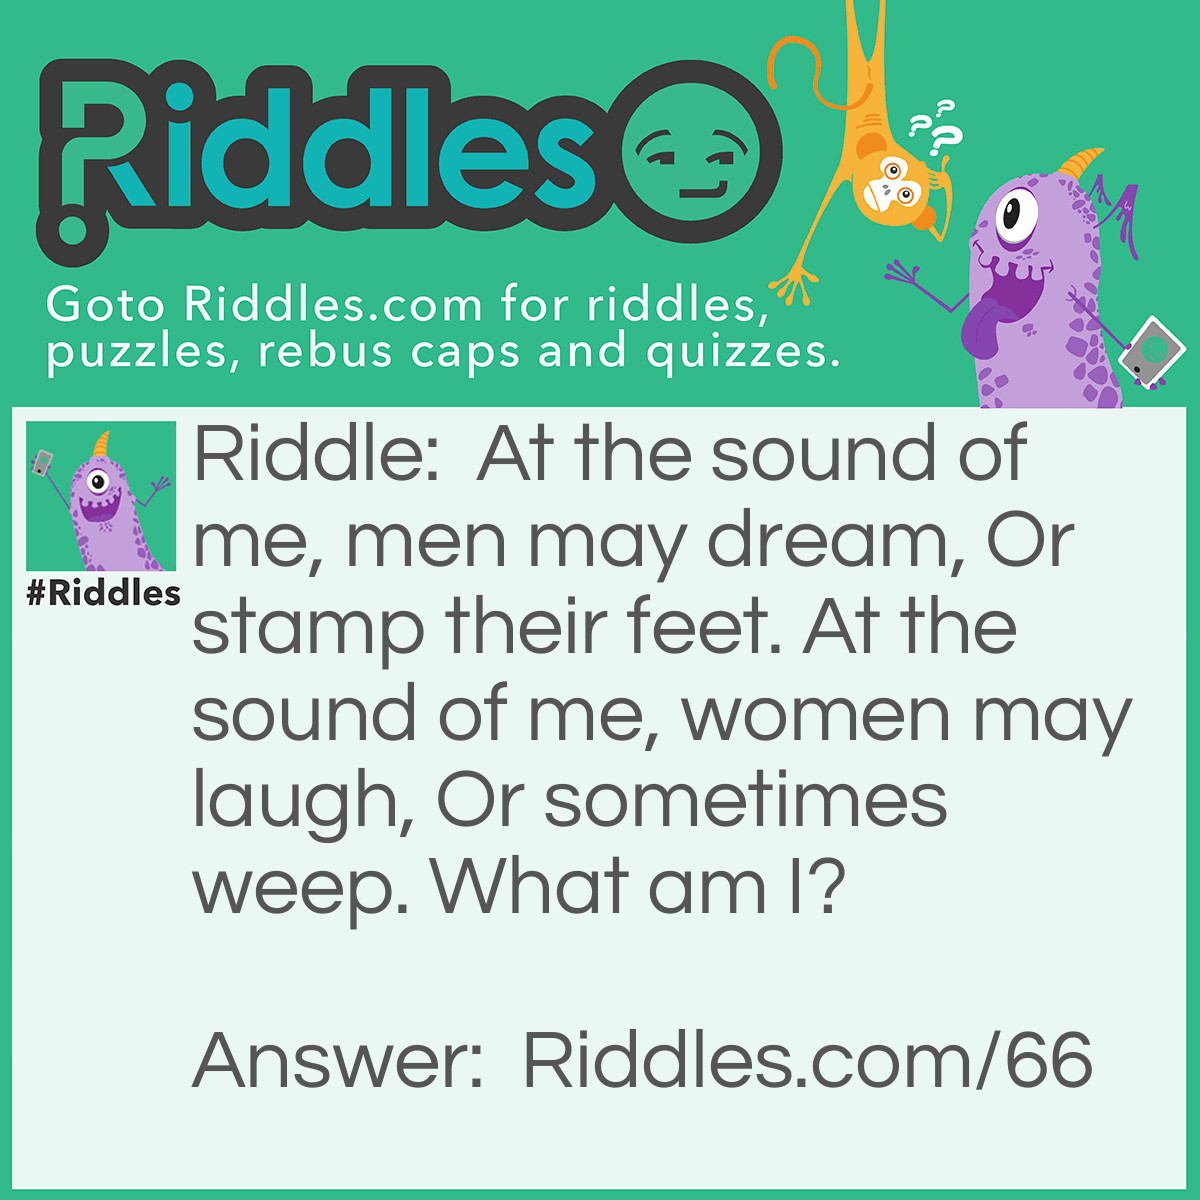 Riddle: At the sound of me, men may dream, Or stamp their feet. At the sound of me, women may <a title="laugh" href="https://www.riddles.com/funny-riddles">laugh</a>, Or sometimes weep. What am I? Answer: I am Music!